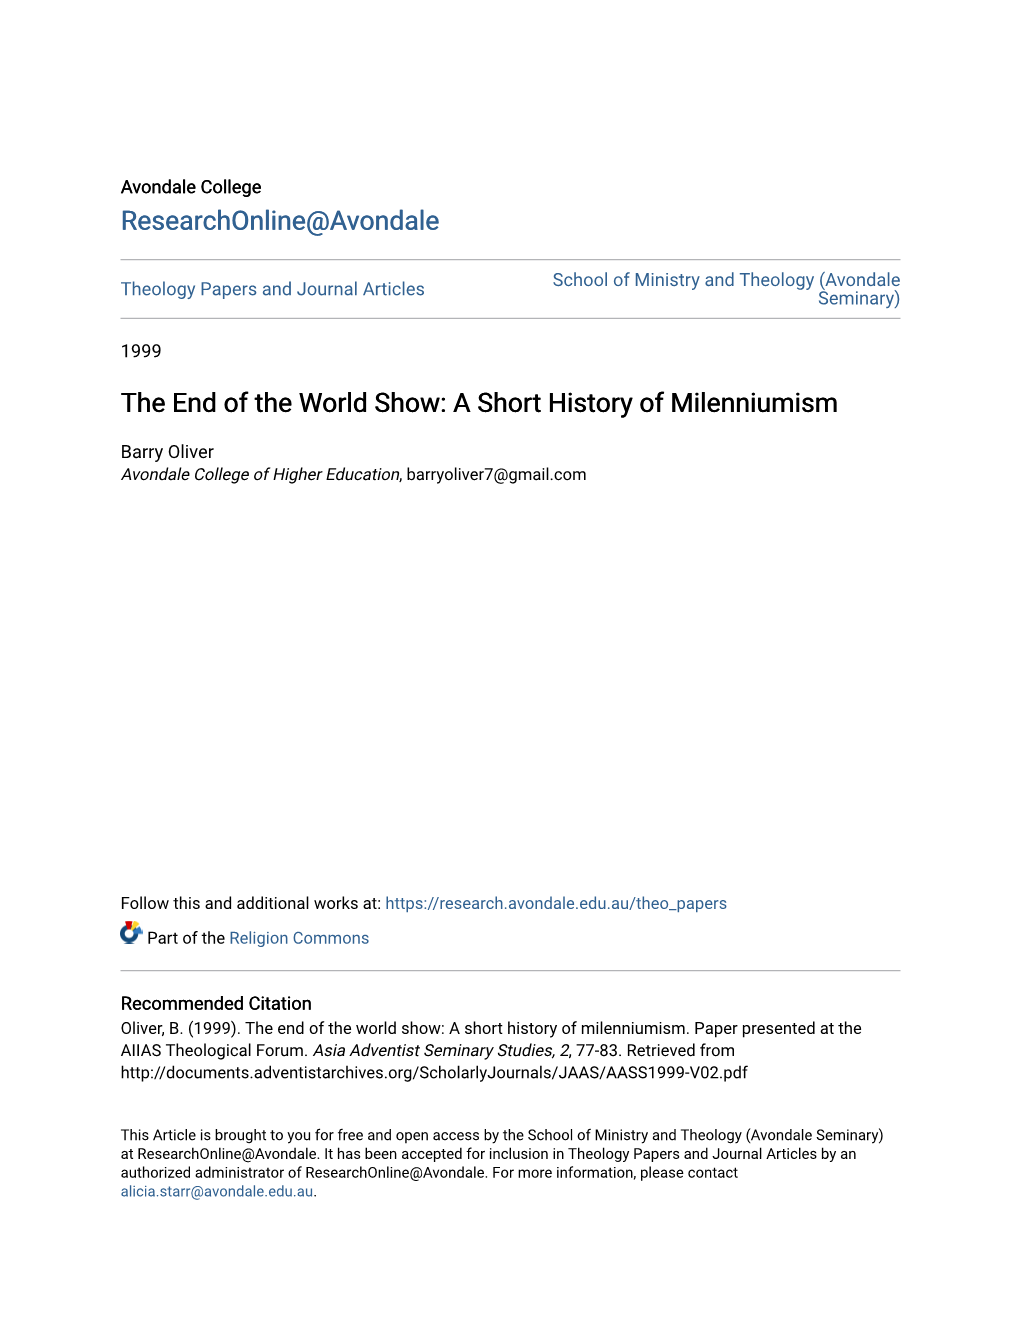 The End of the World Show: a Short History of Milenniumism